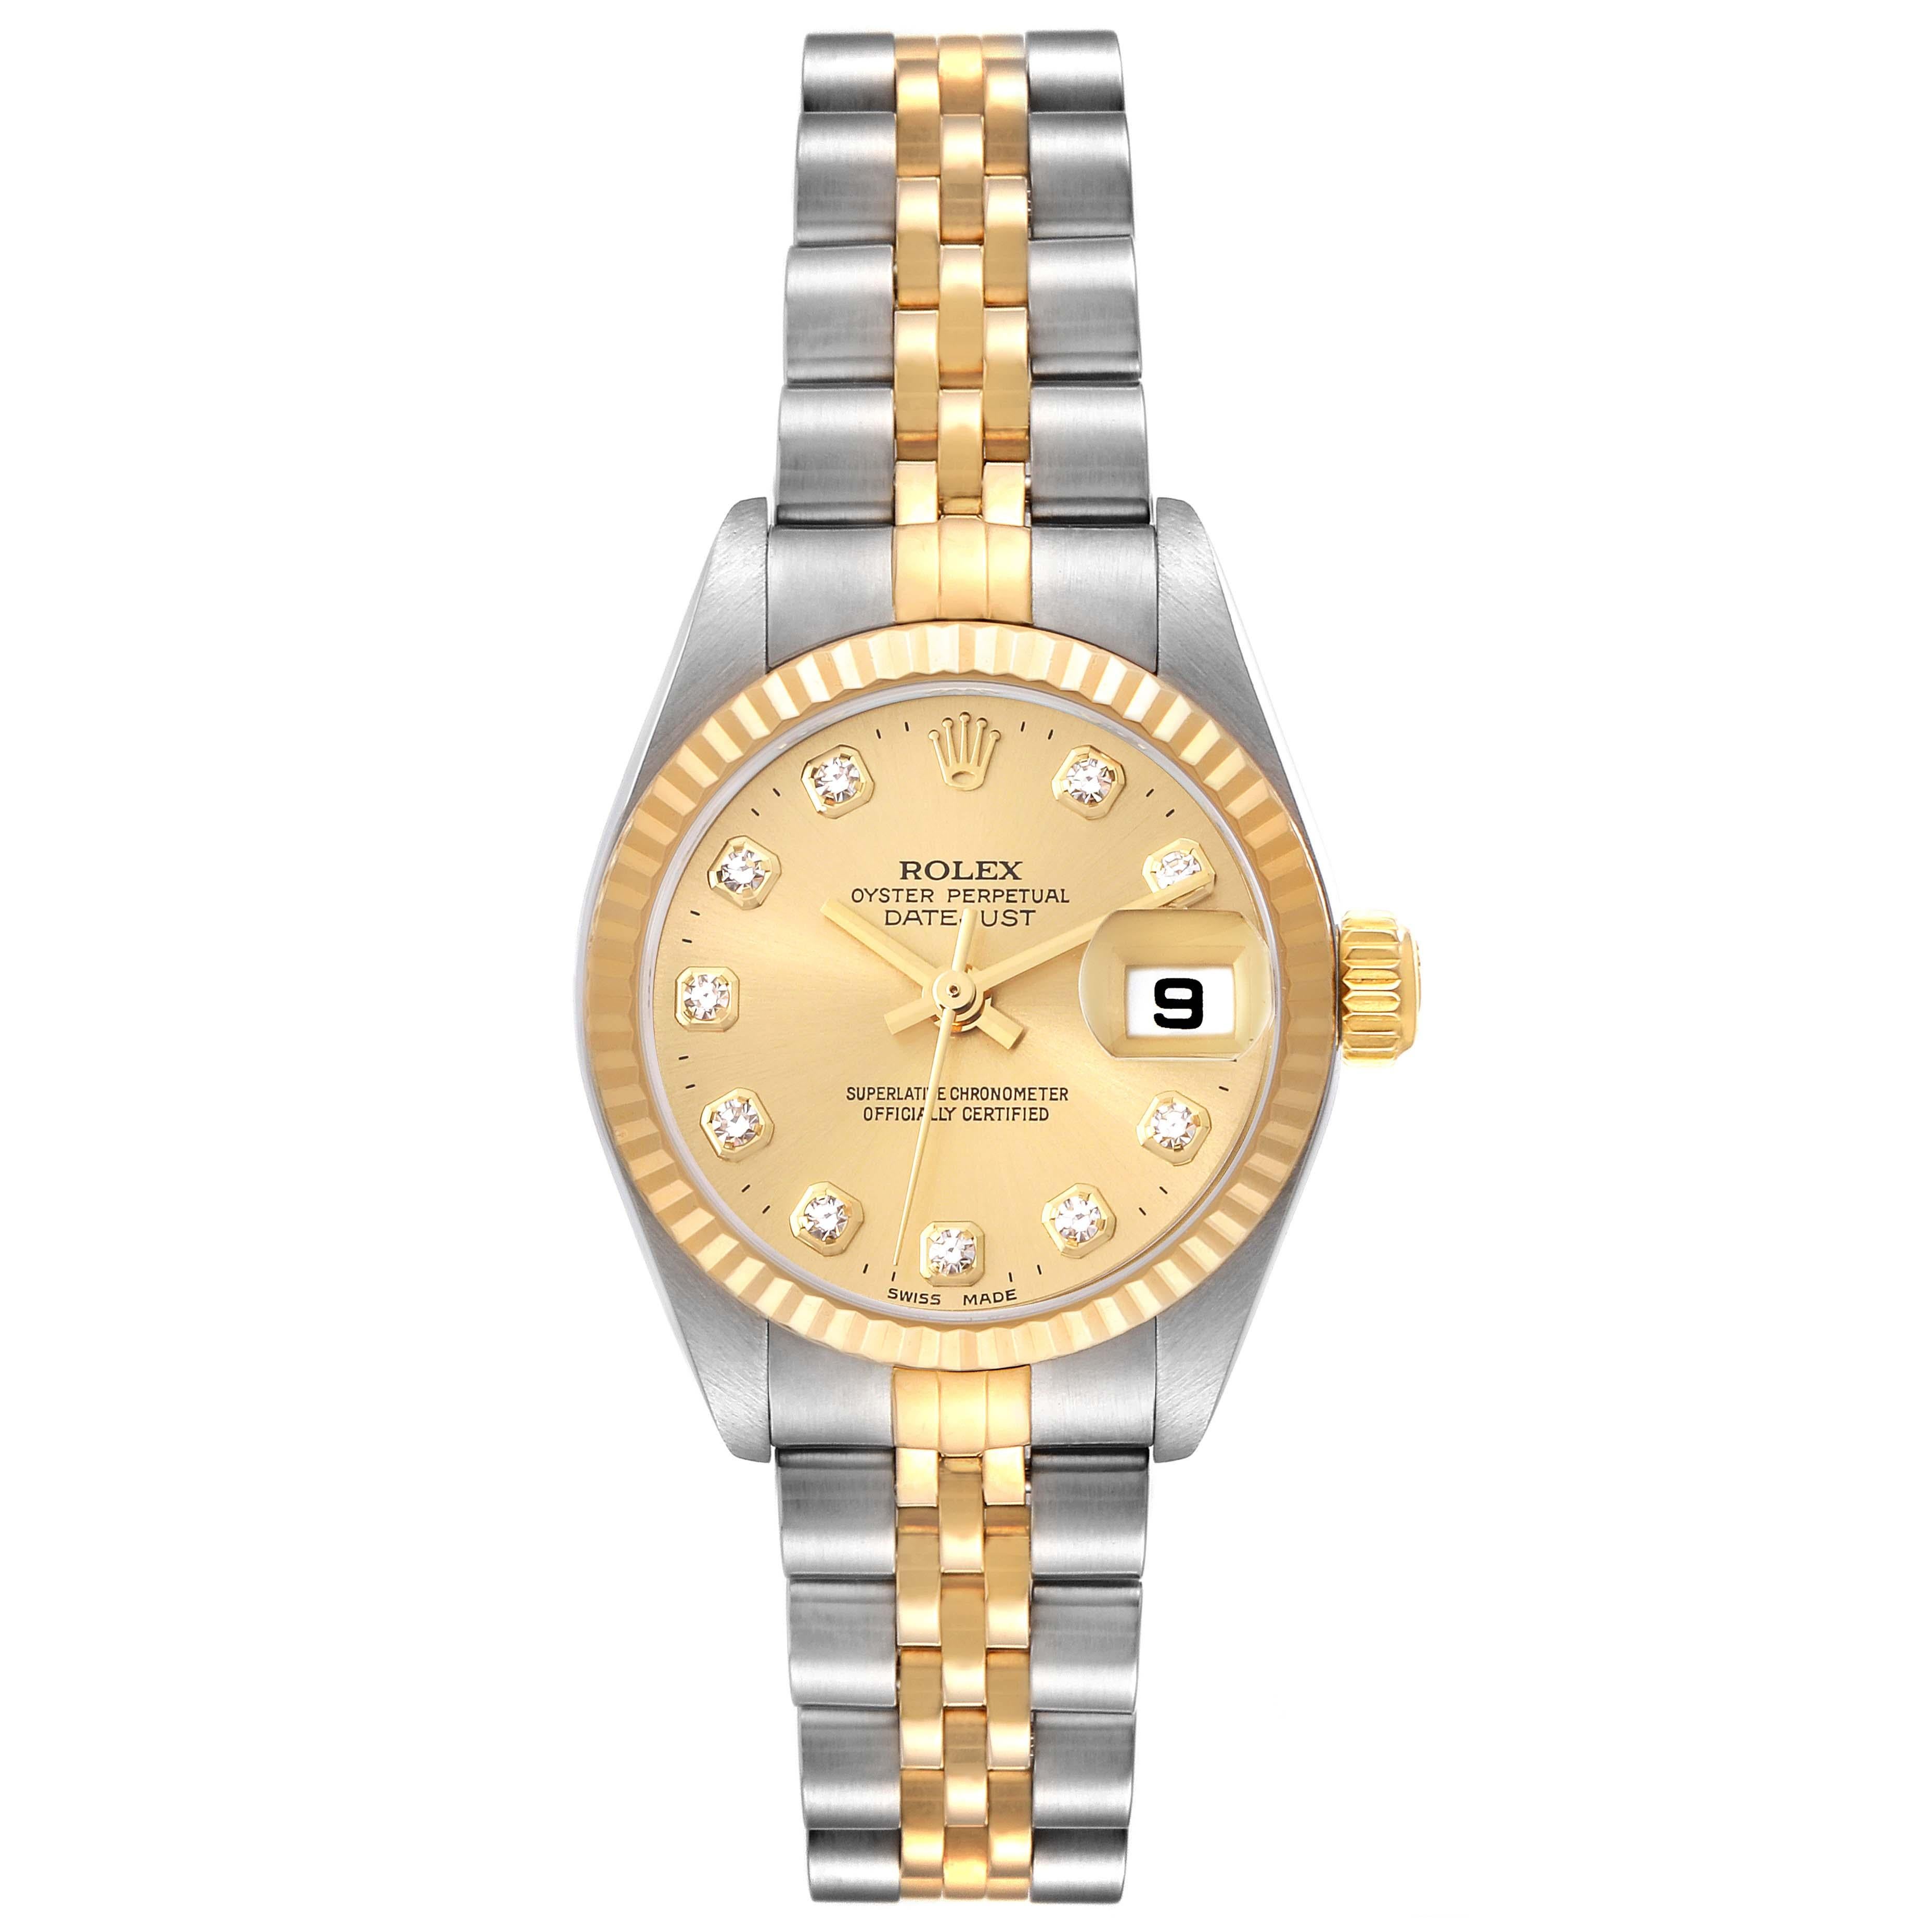 Rolex Datejust Steel Yellow Gold Diamond Dial Ladies Watch 79173. Officially certified chronometer automatic self-winding movement. Stainless steel oyster case 26 mm in diameter. Rolex logo on an 18K yellow gold crown. 18k yellow gold fluted bezel.